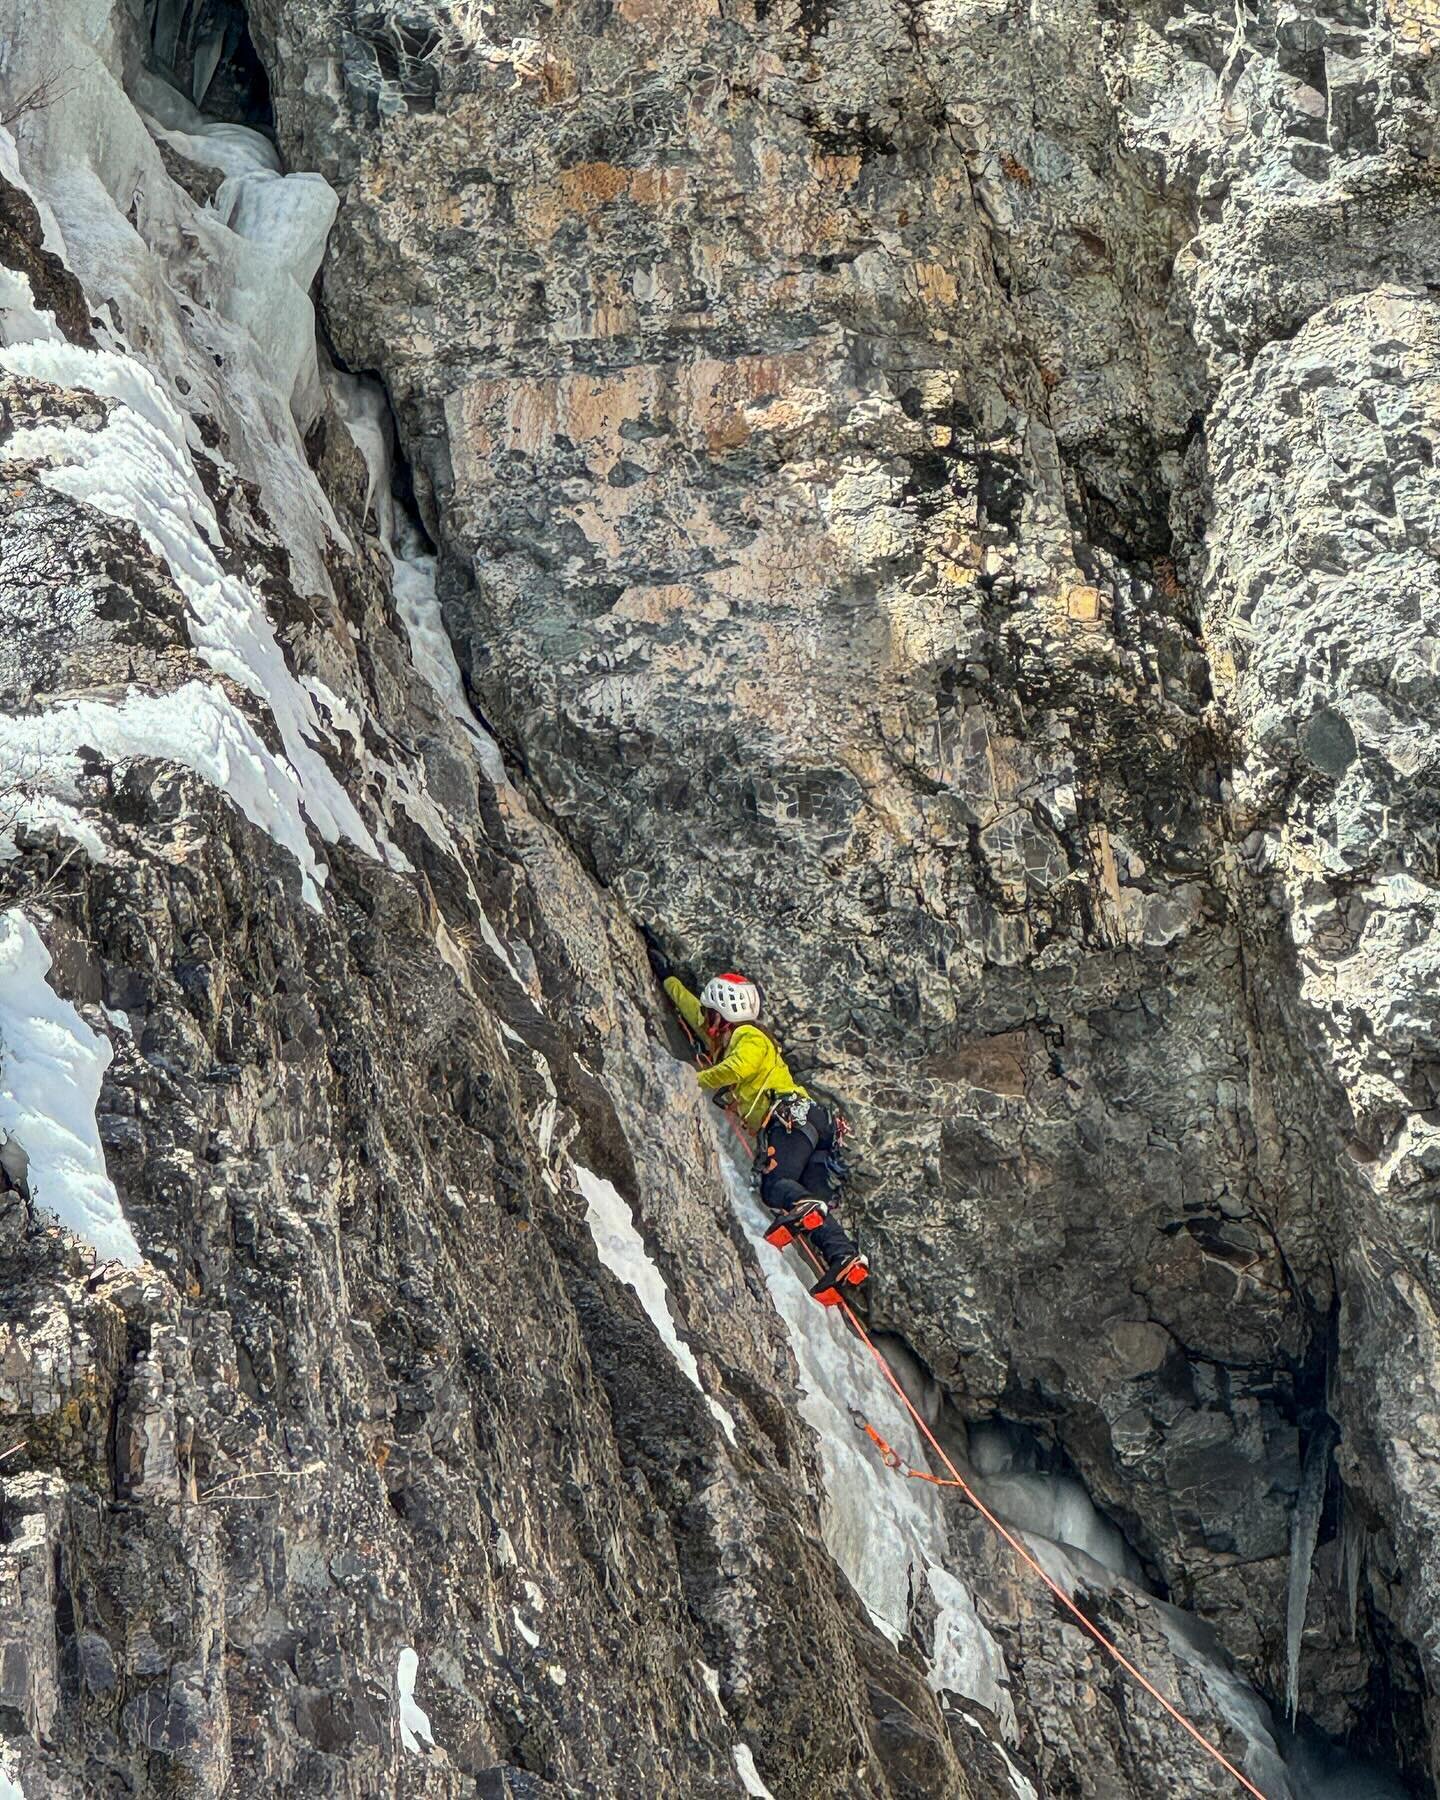 A few shots from the past week or so at work and at play

pics &amp; partners: @pfaff_anna @fergratton @westernclimbingguides @brooklynwarren @skywardmountaineering @mmbetancourt @lucymulvs @_carly_jane @ourayicepark